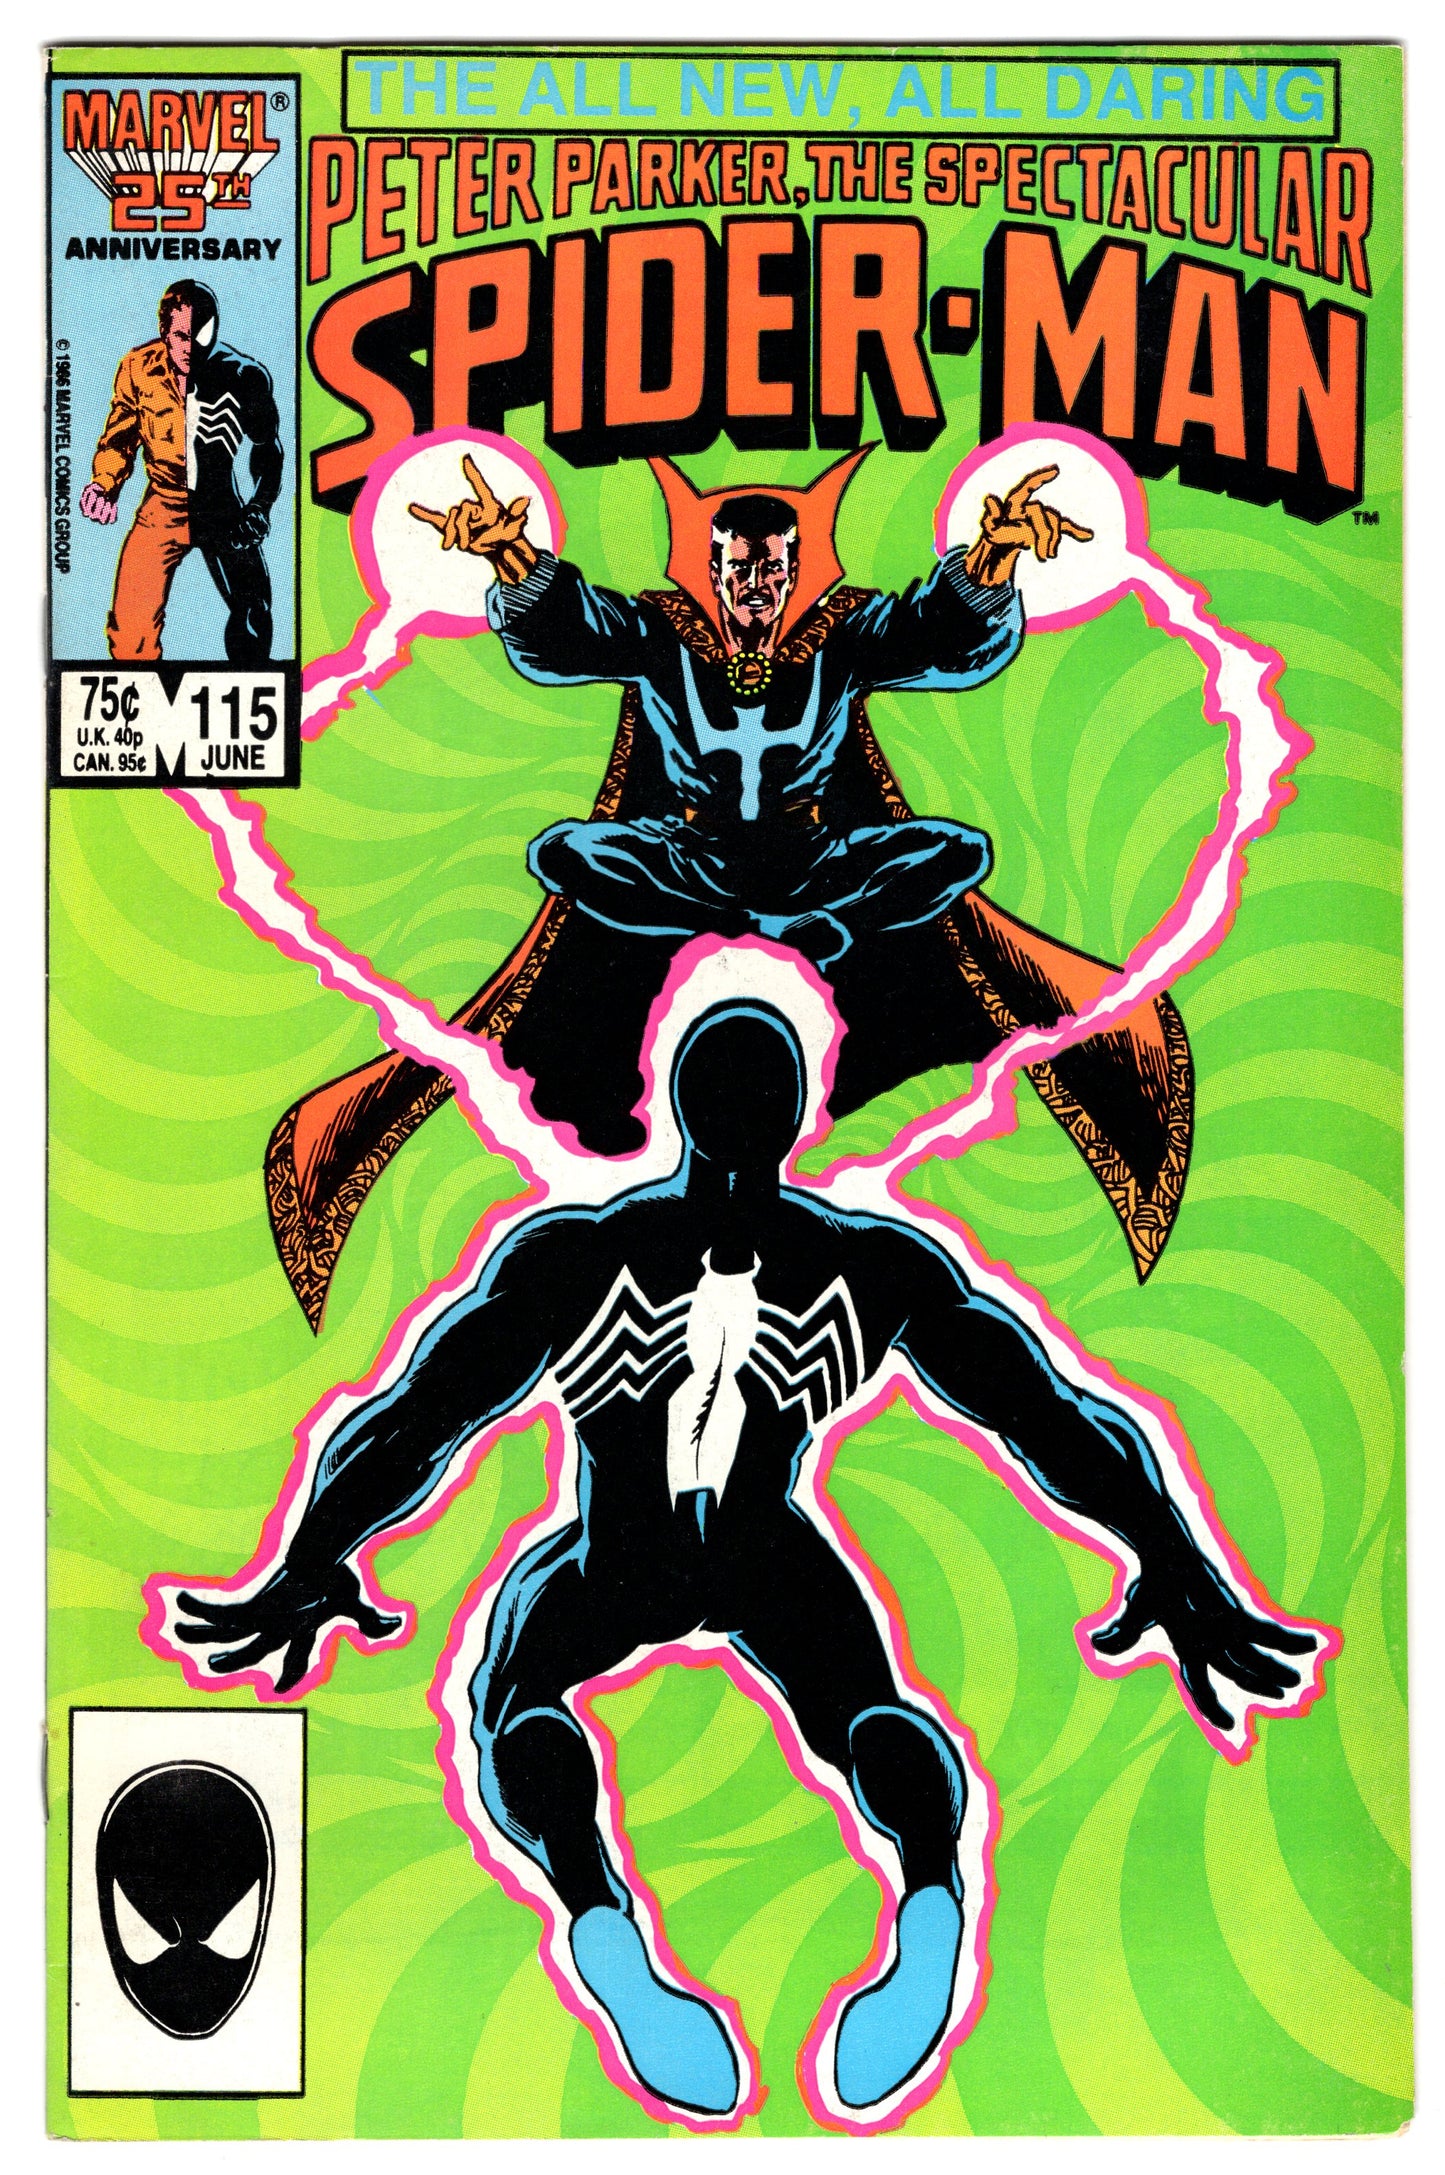 Peter Parker, The Spectacular Spider-Man Issue #115 (June, 1986 - Marvel Comics) FN+